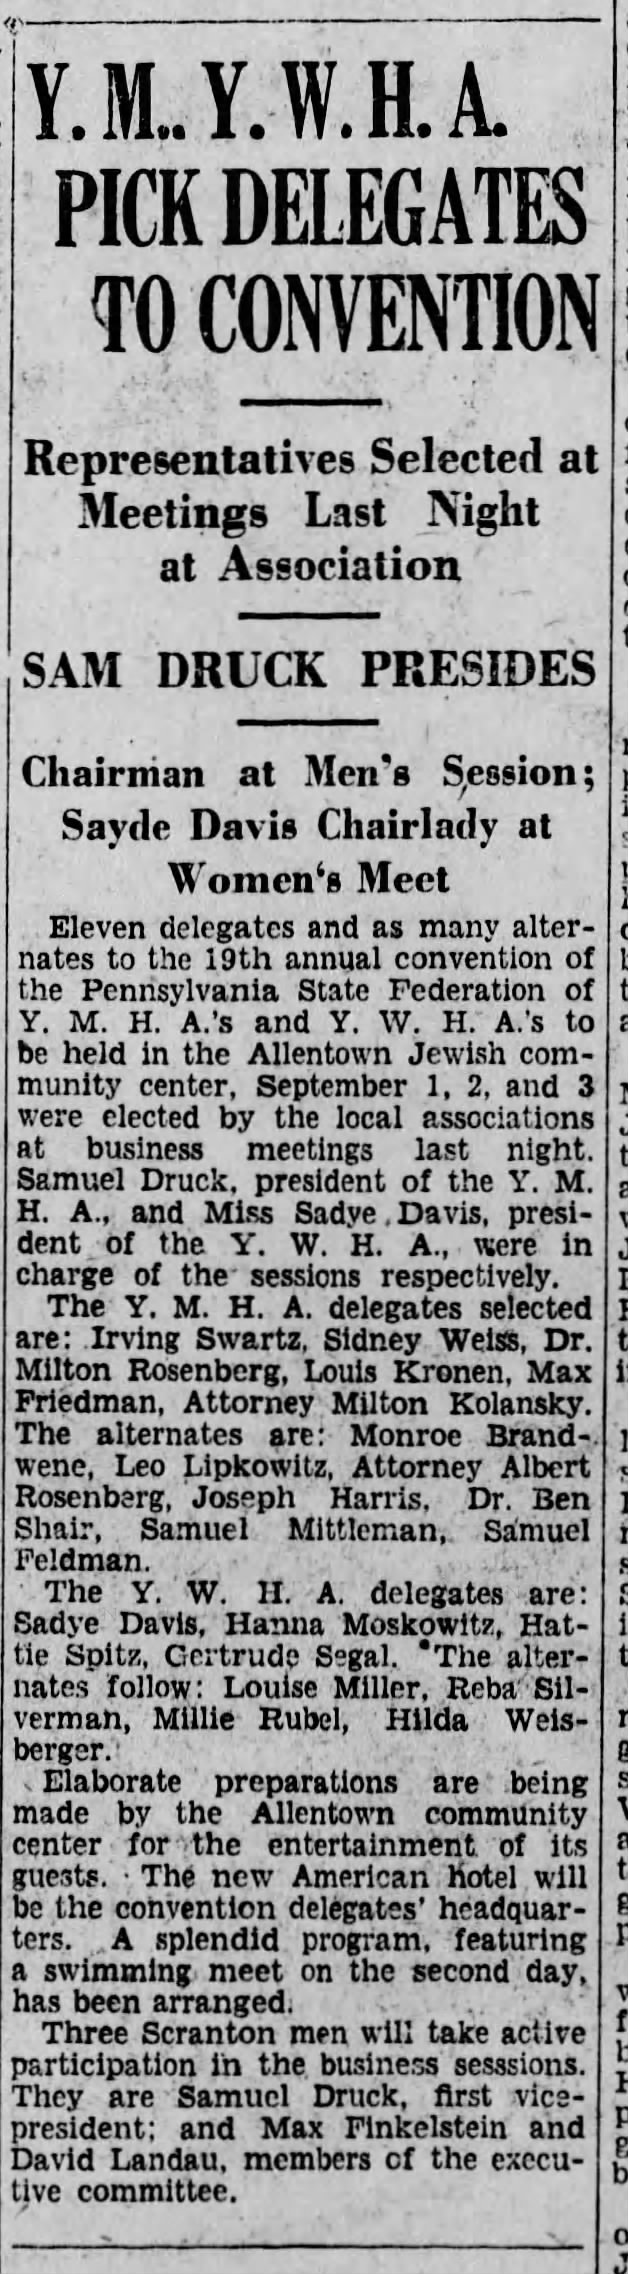 YMHA and YWHA to hold convention at Allentown Jewish Community Center, 1928